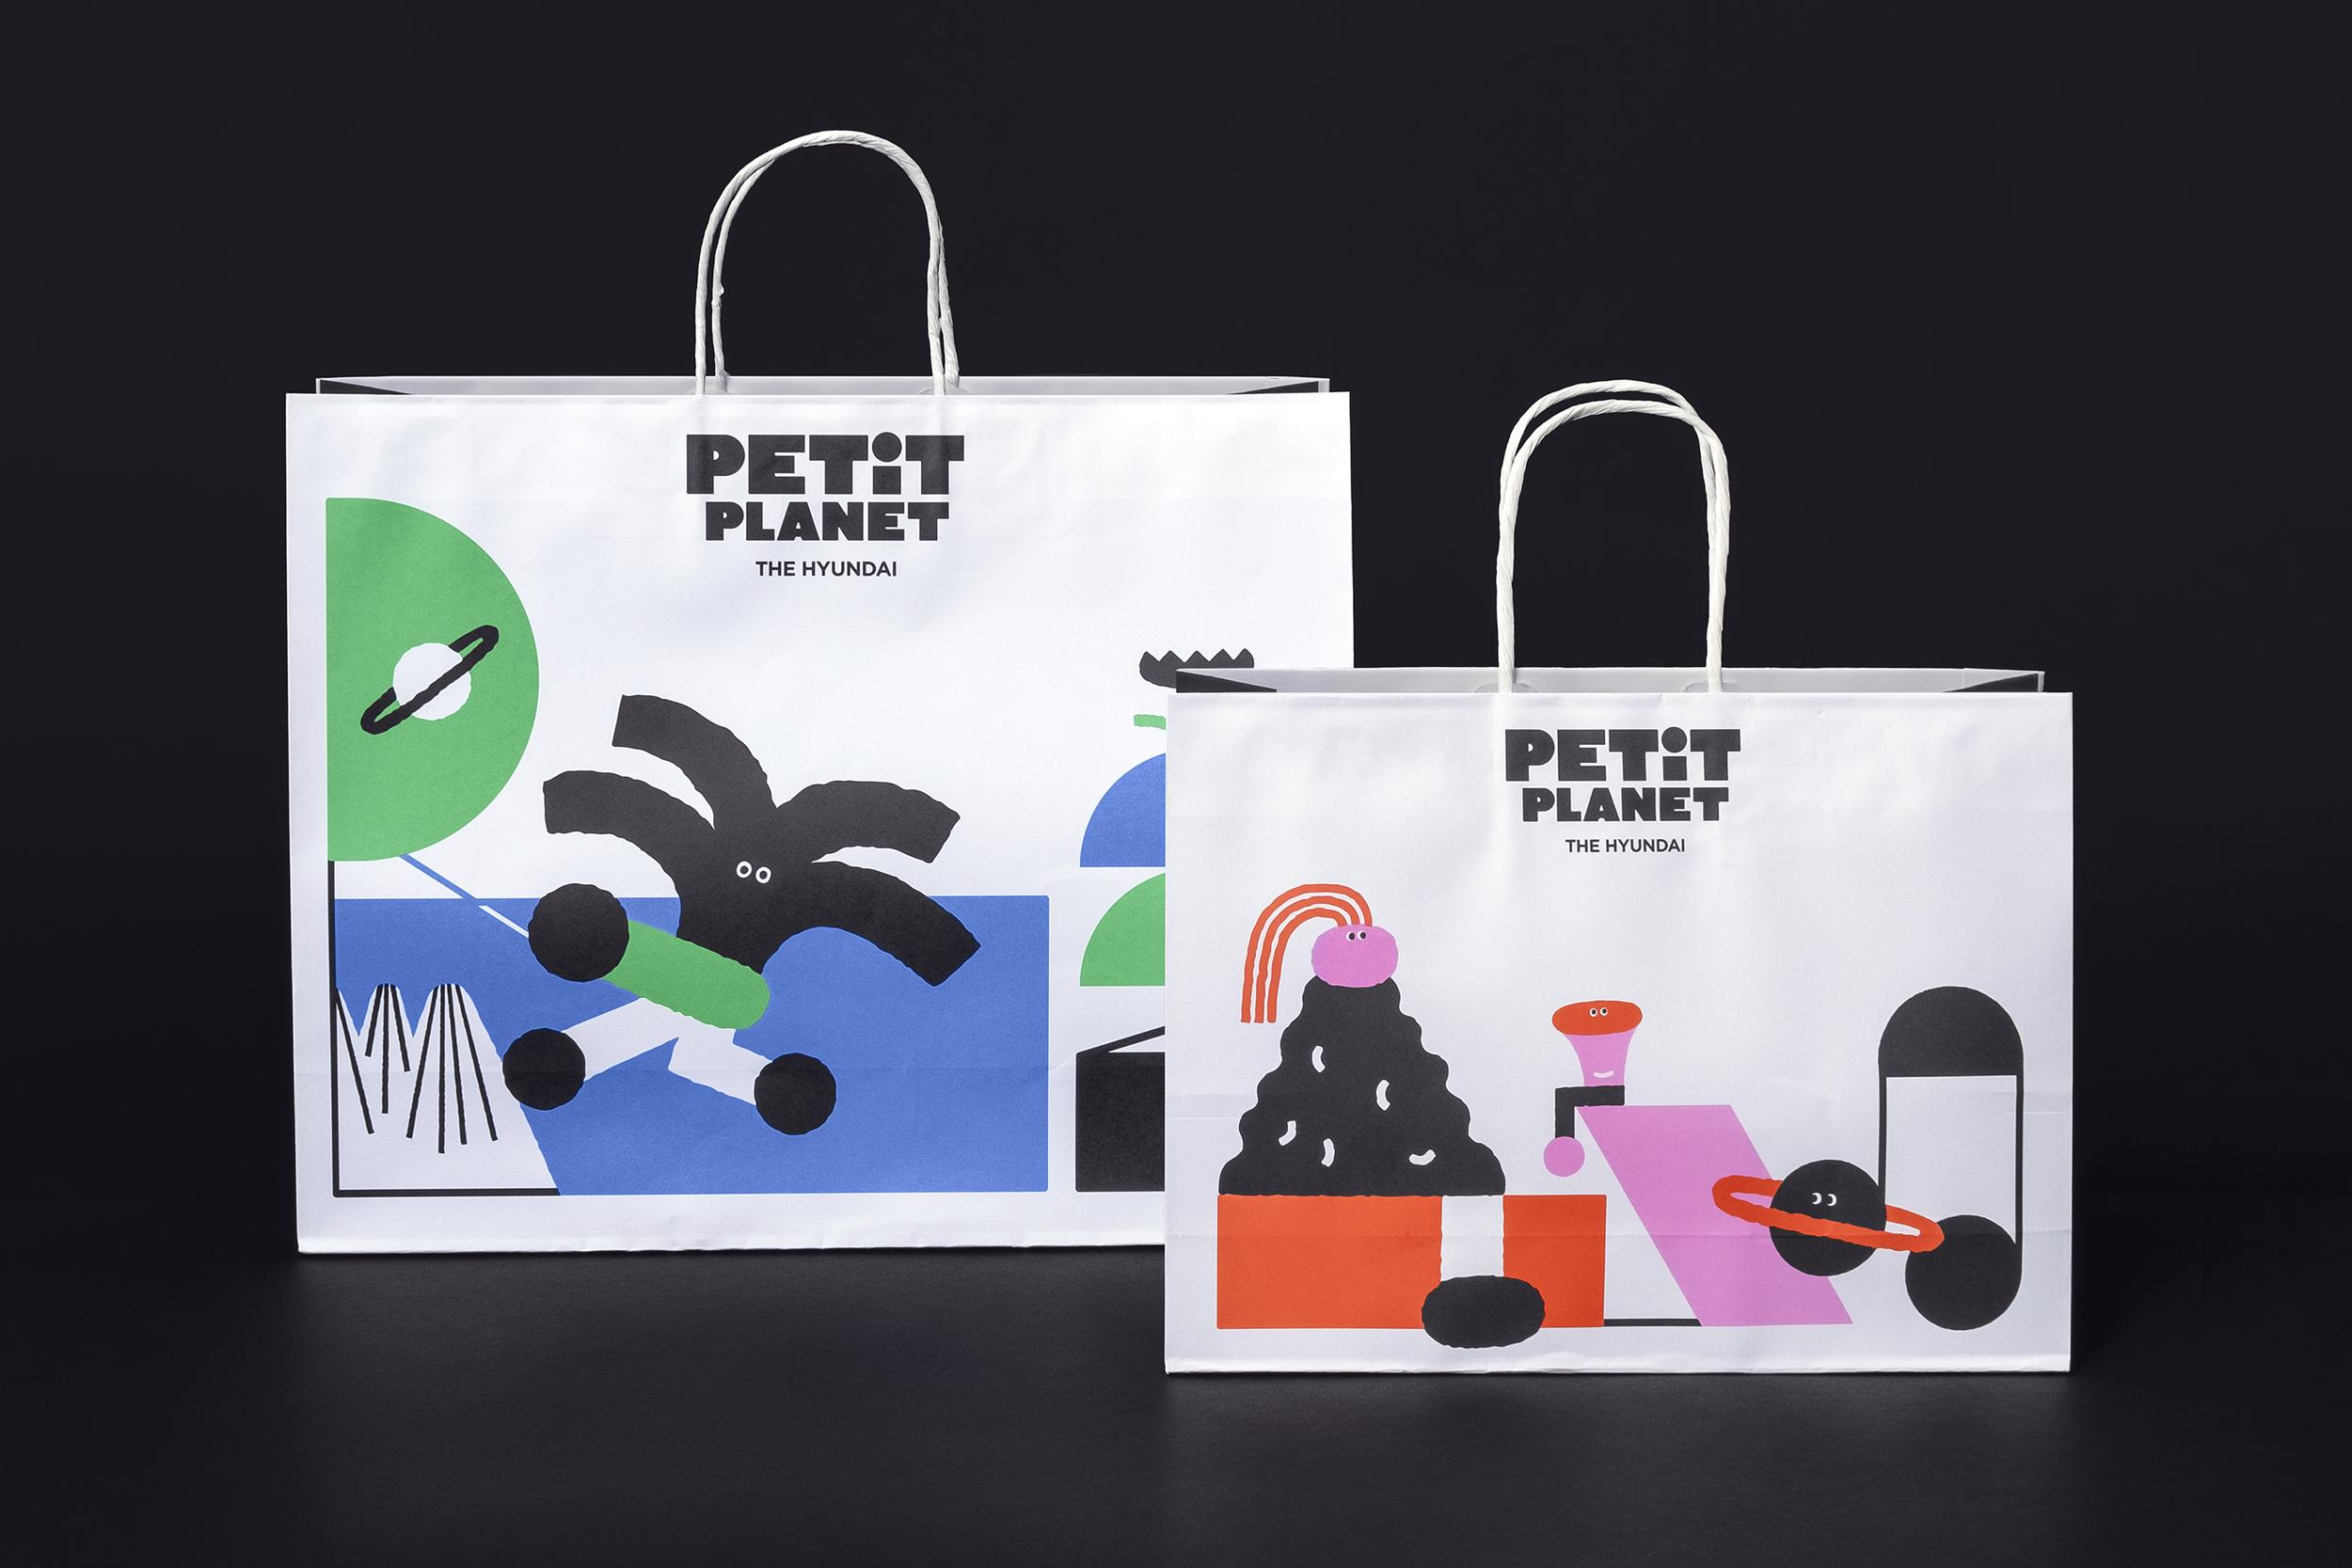 Brand identity and illustrated shopping bags by Studio fnt for toy department Petit Planet at South Korean department store Hyundai